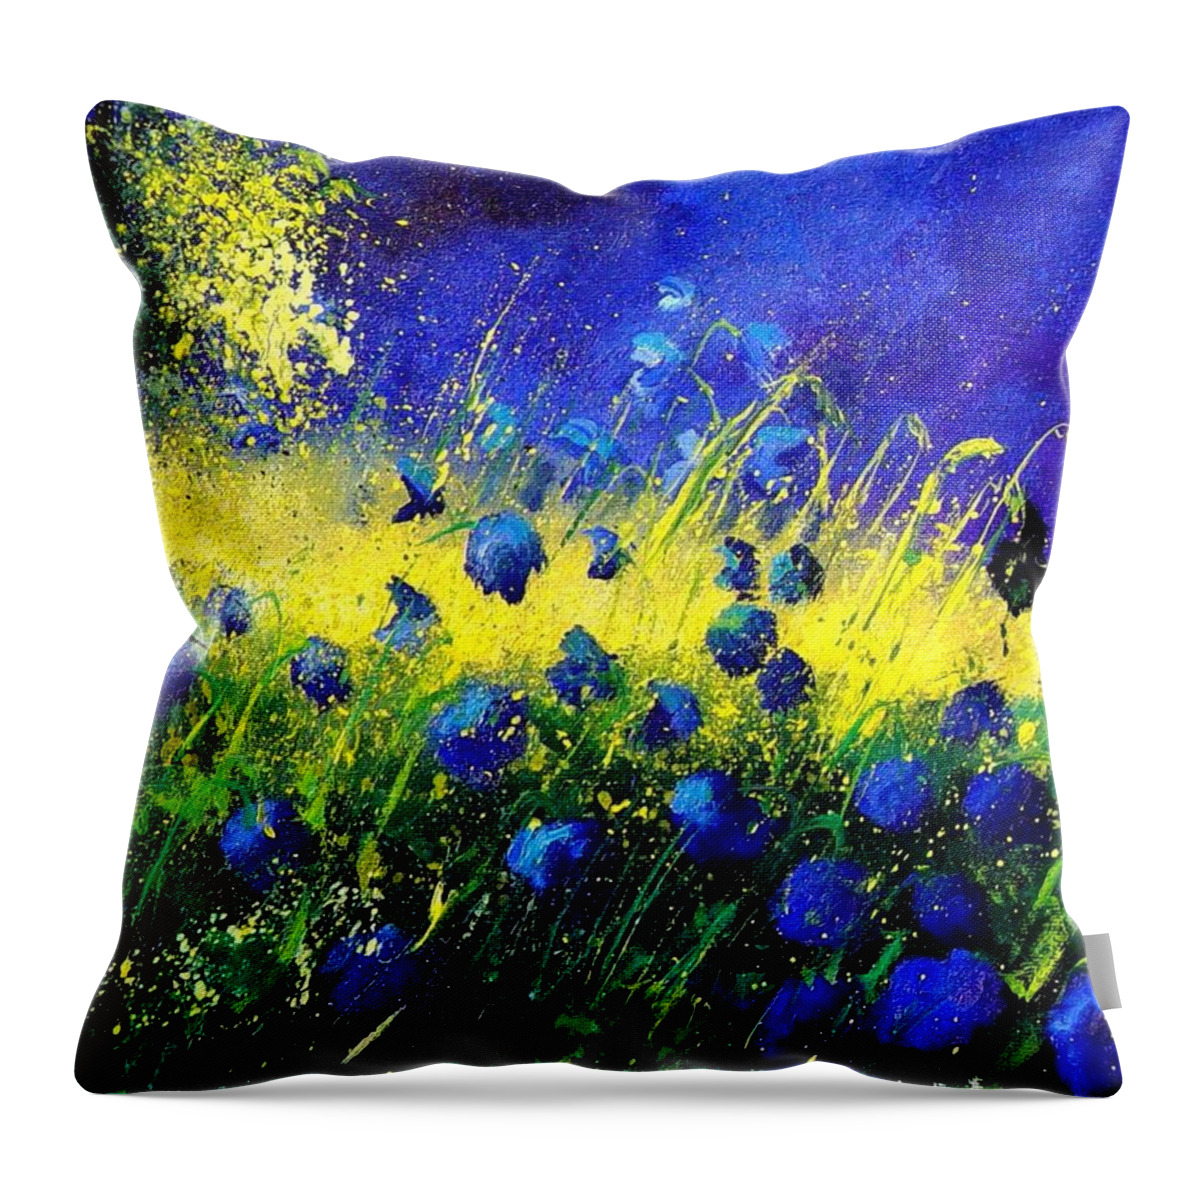 Flowers Throw Pillow featuring the painting Blue Poppies by Pol Ledent